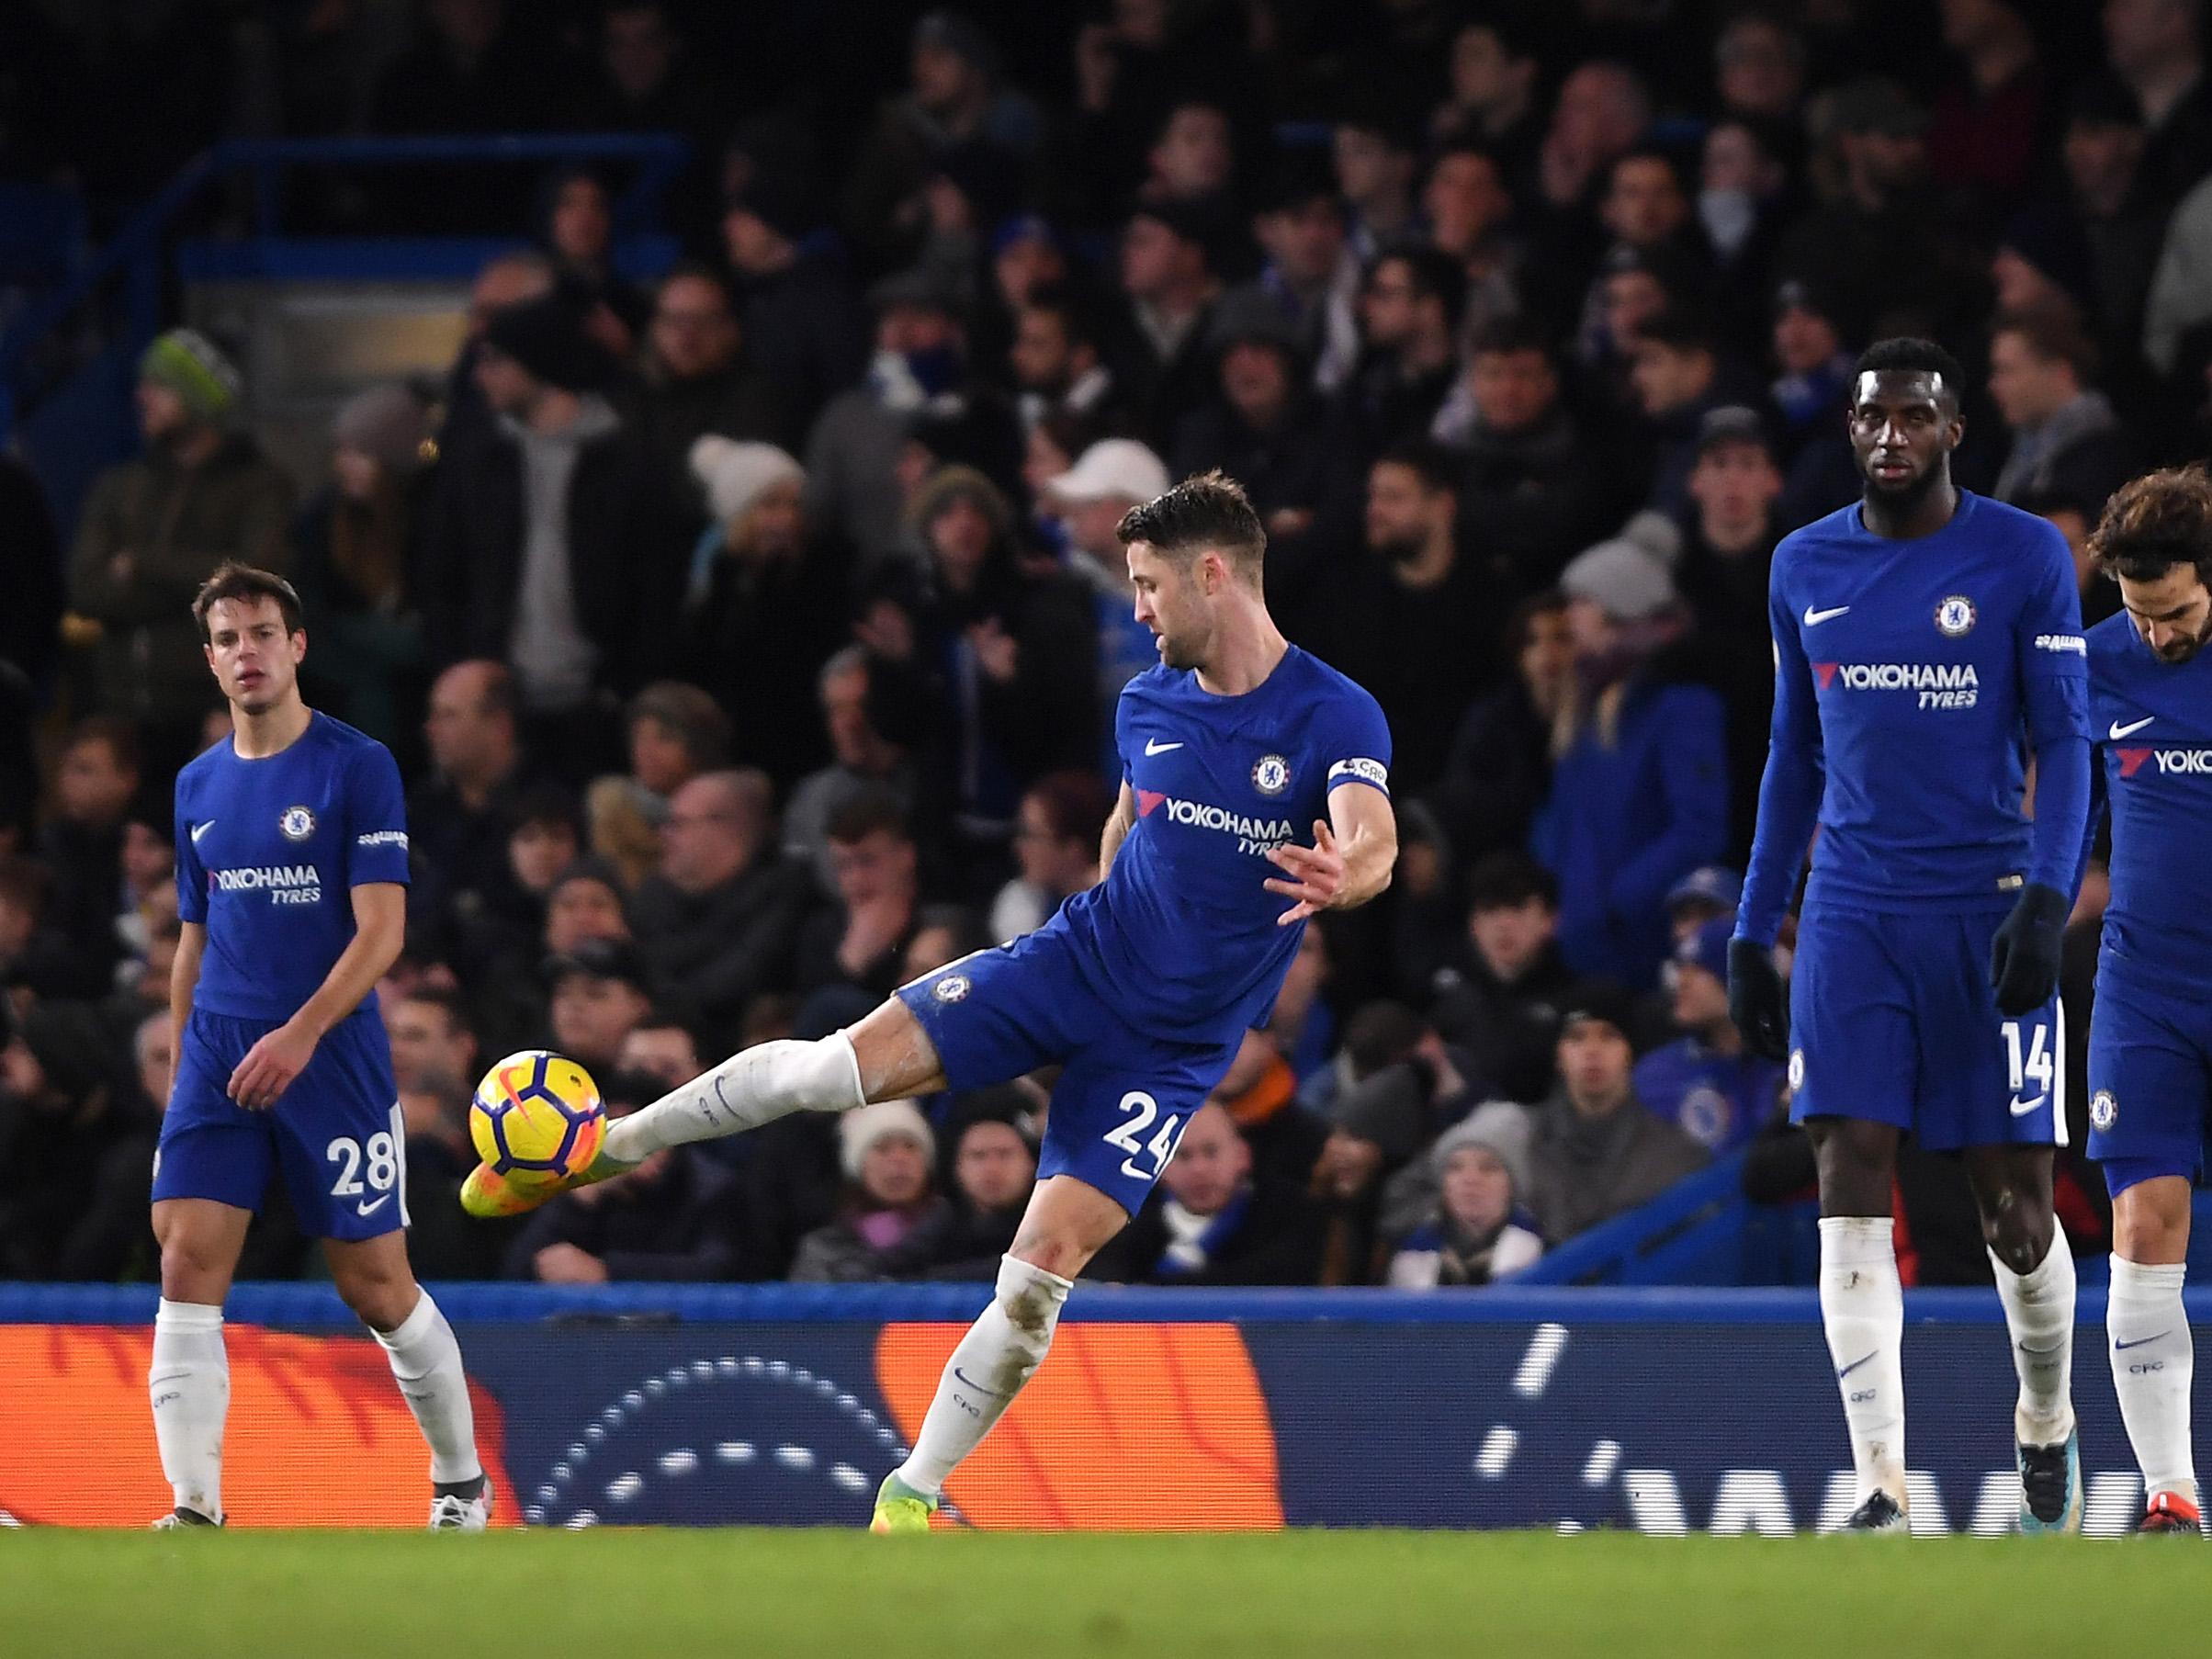 Chelsea vs West Bromwich Albion - live: Where can I watch it, what time is kick-off, channel, team news, odds